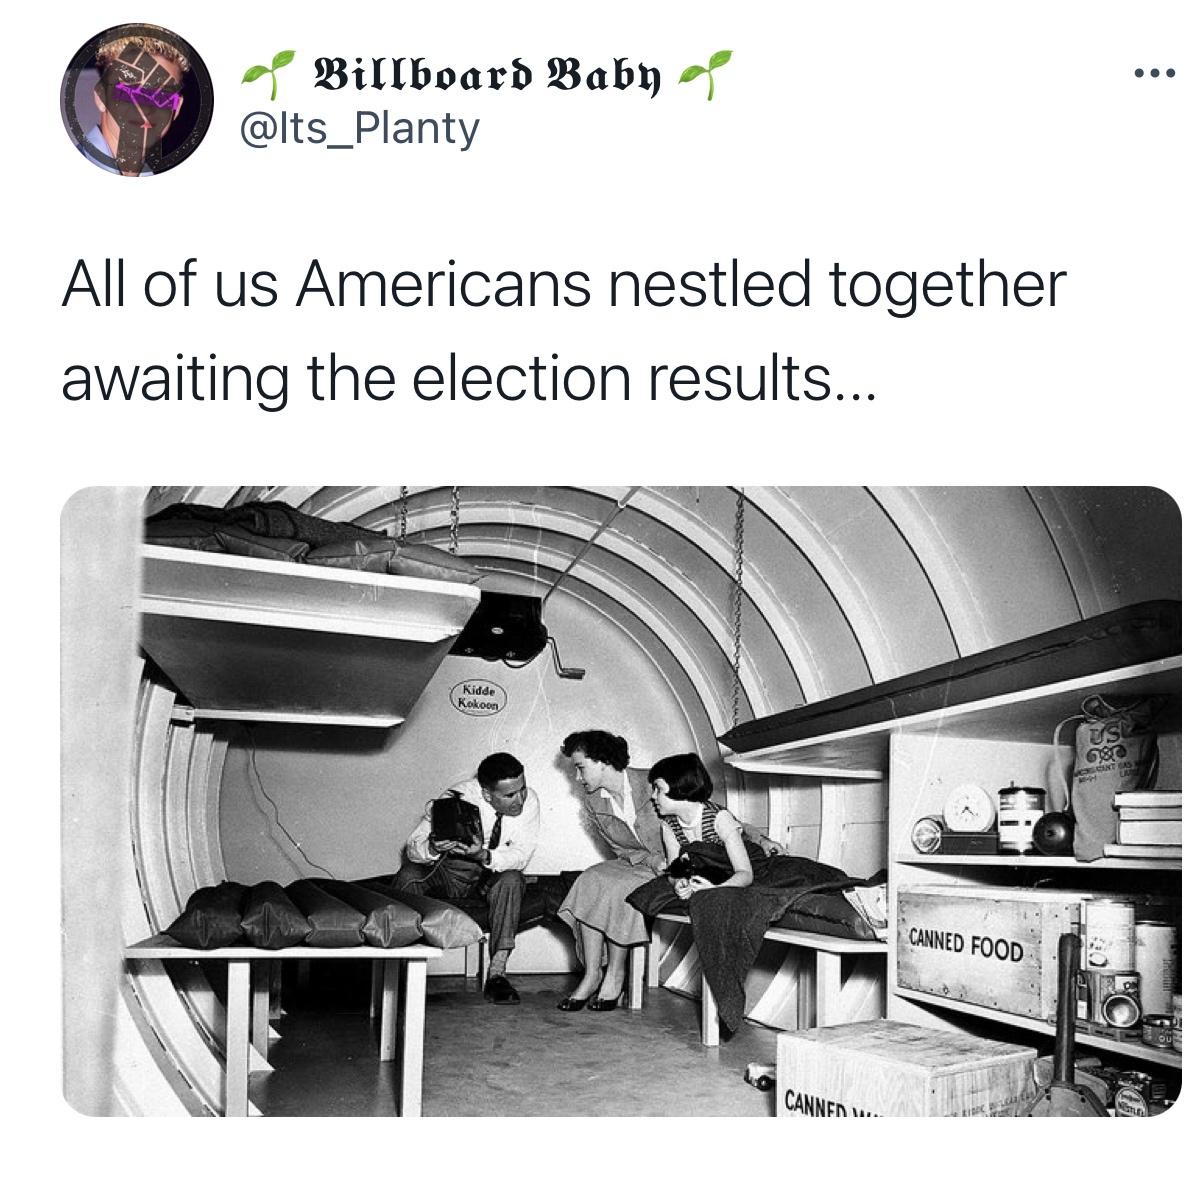 bomb shelter - ... O Billboard Baby a All of us Americans nestled together awaiting the election results... Kidde Kokoon Usi 80 Canned Food Canner